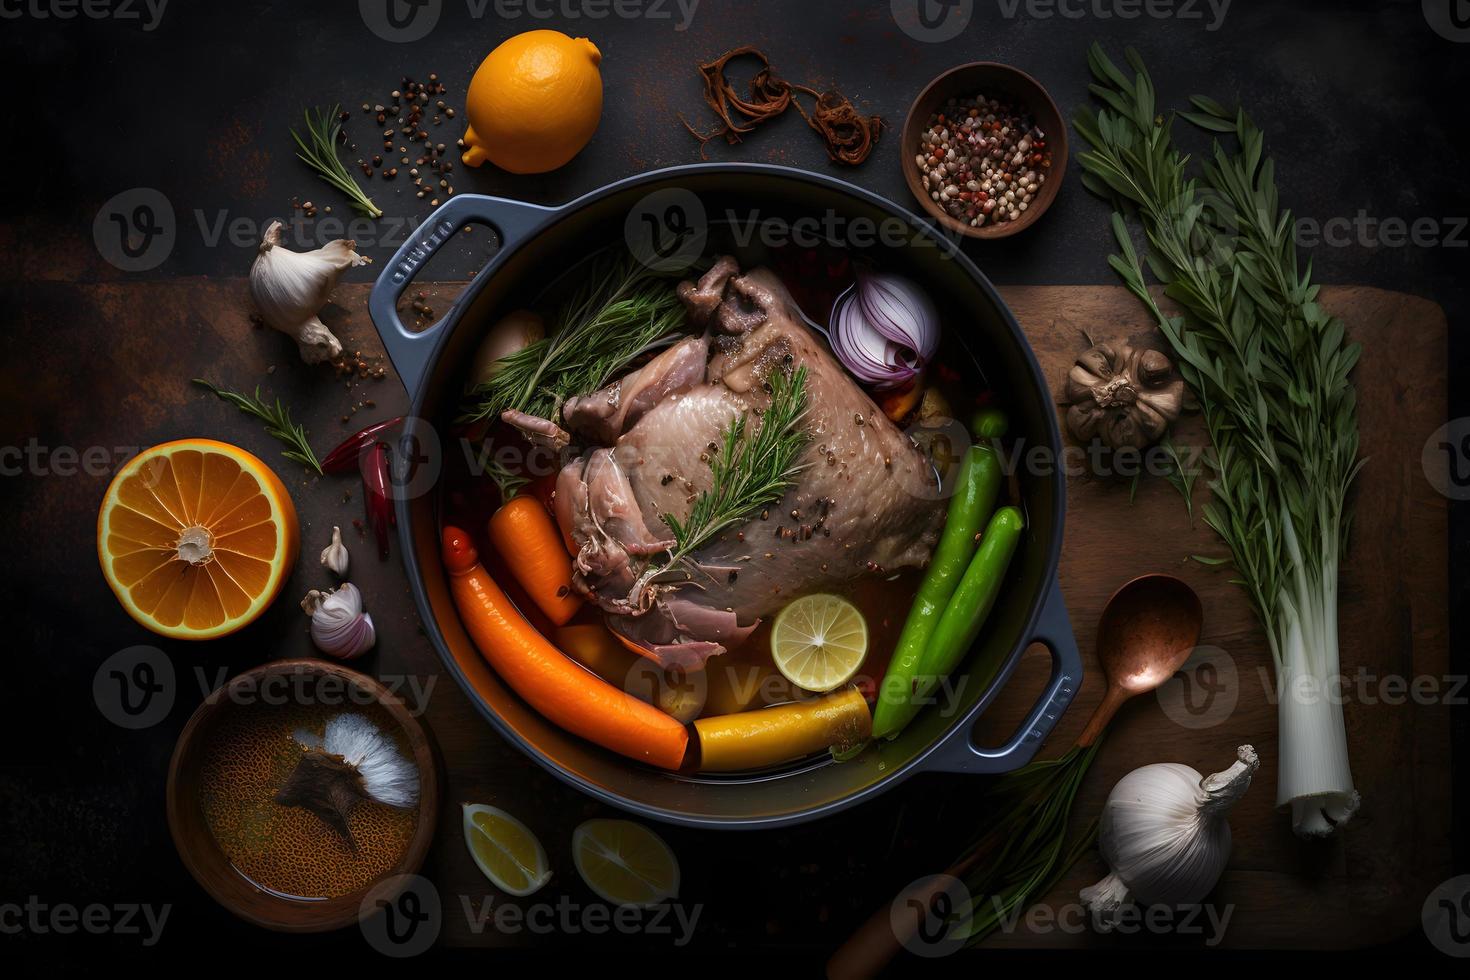 Ingredients for roasted pork knuckle in casserole with spices photo